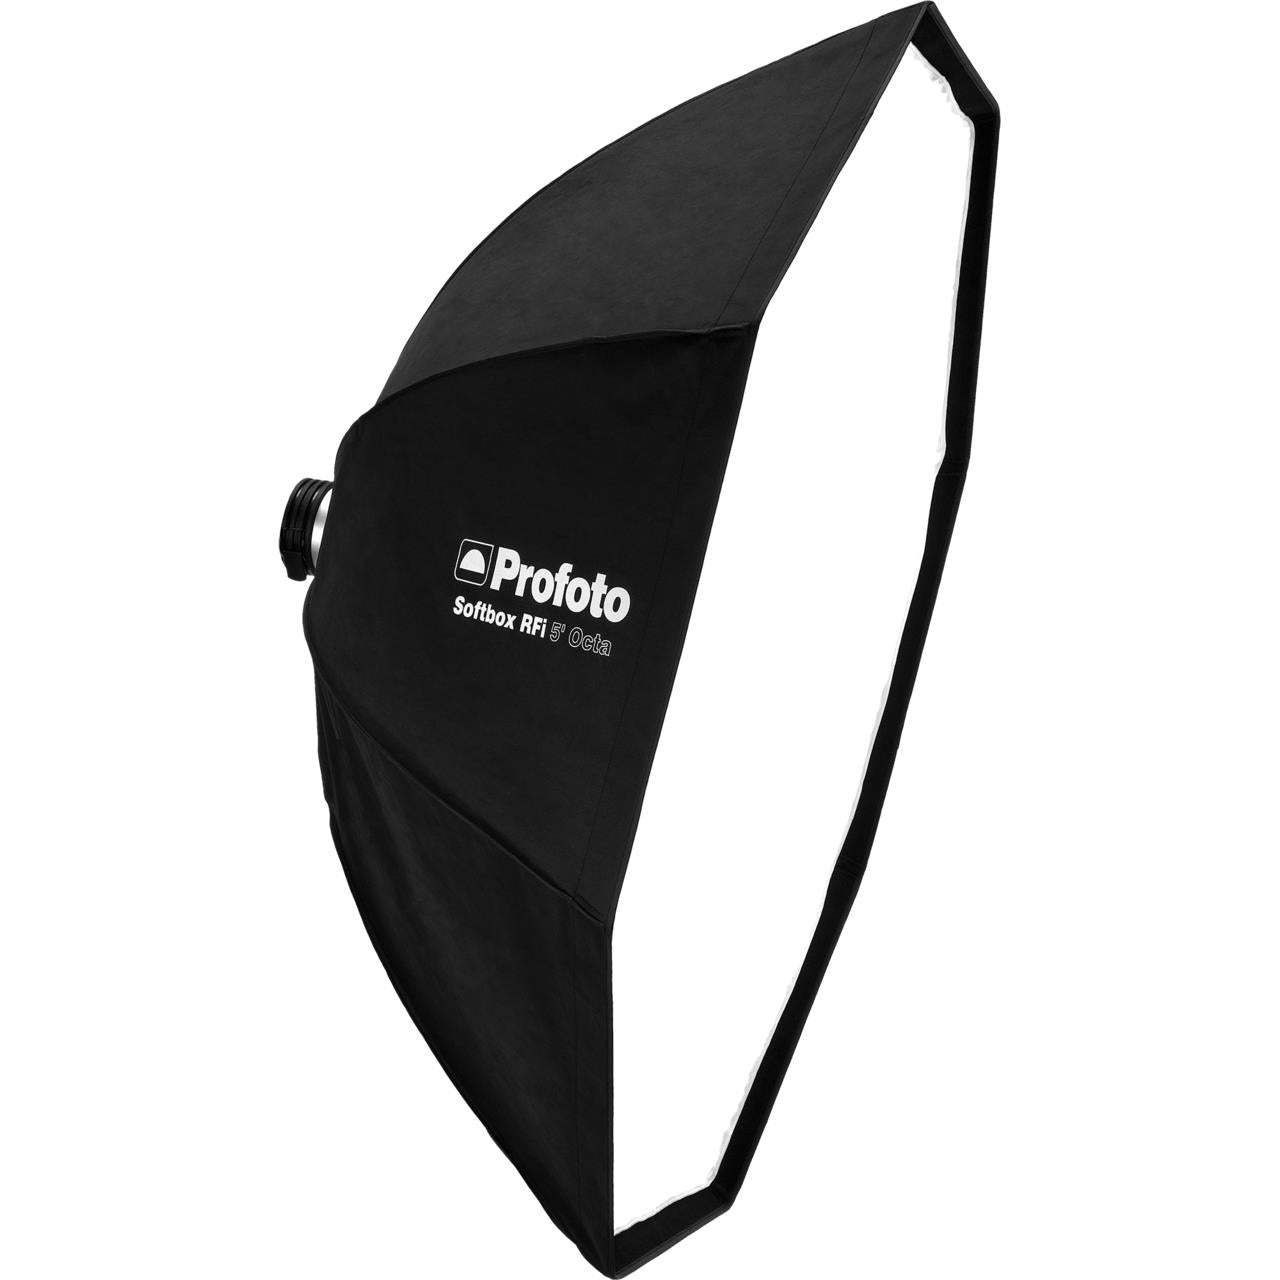 We Review Profoto Clic 2.7' Softbox – Not for Everyone